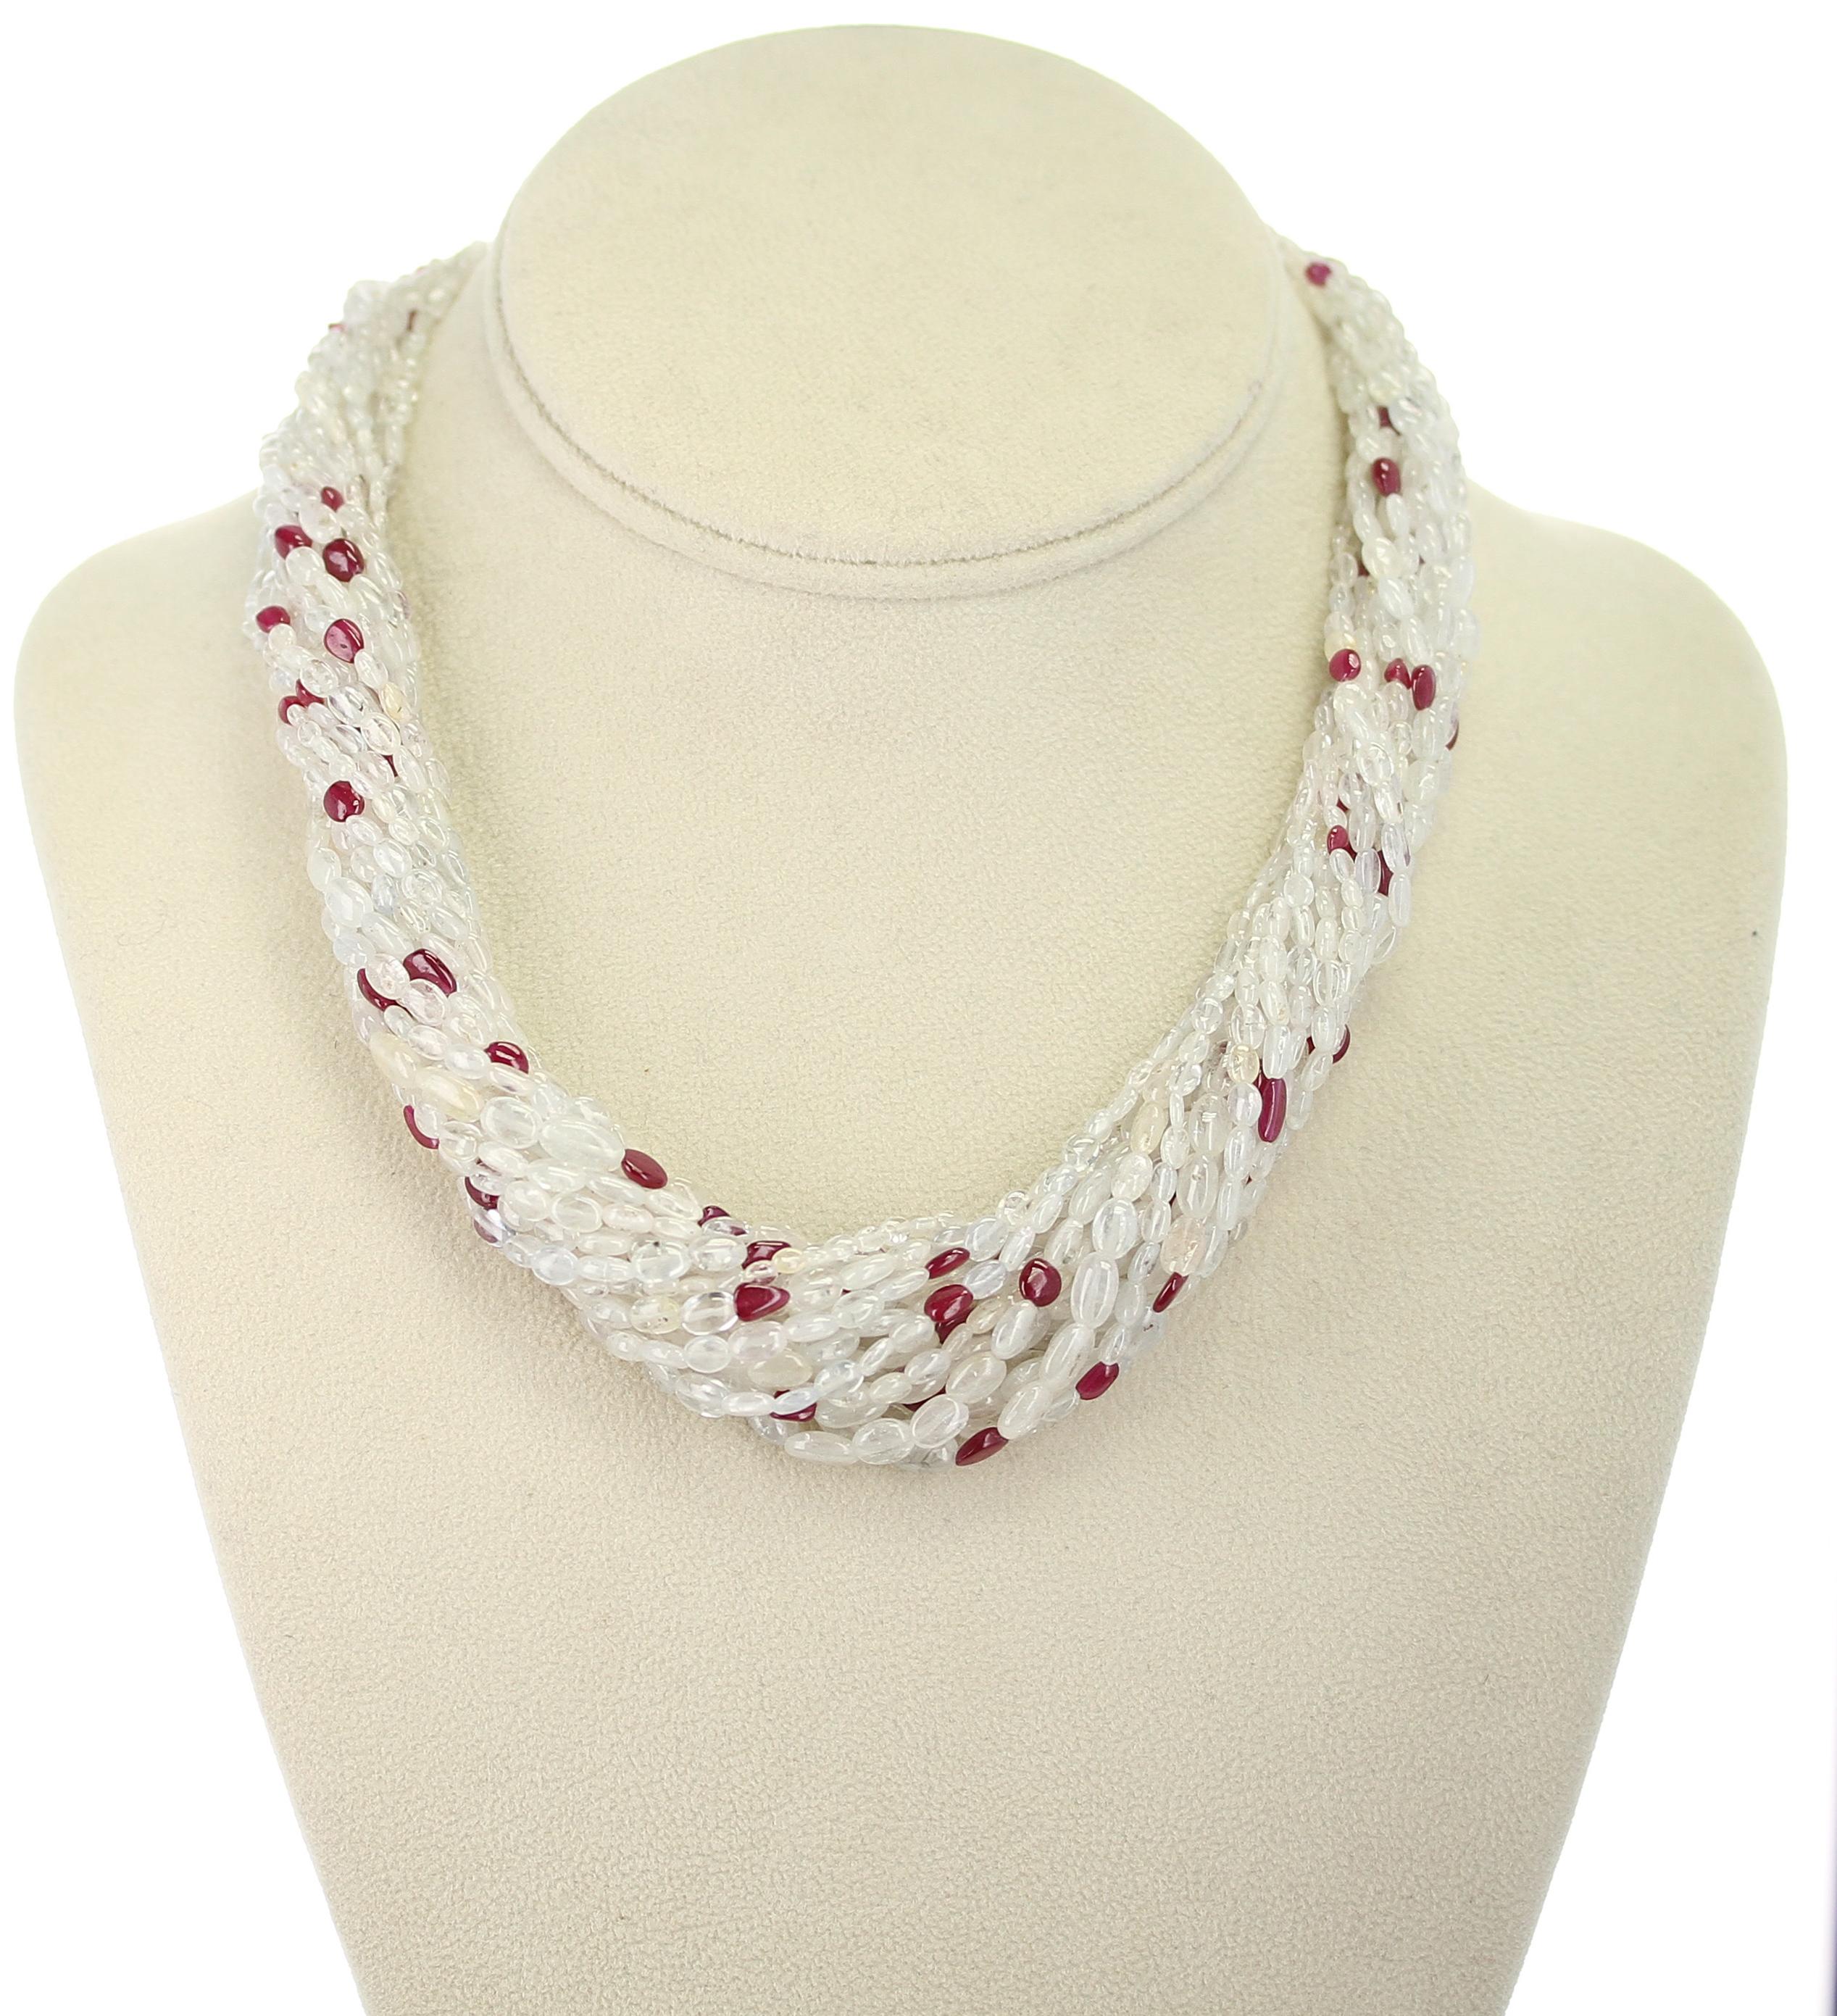 A Genuine & Natural Yellowish White Sapphire Plain Tumbled Beads with Ruby Choker Necklace consisting of 17 Lines weighing 680 carats. The clasp is 18 Karat. The length is 18